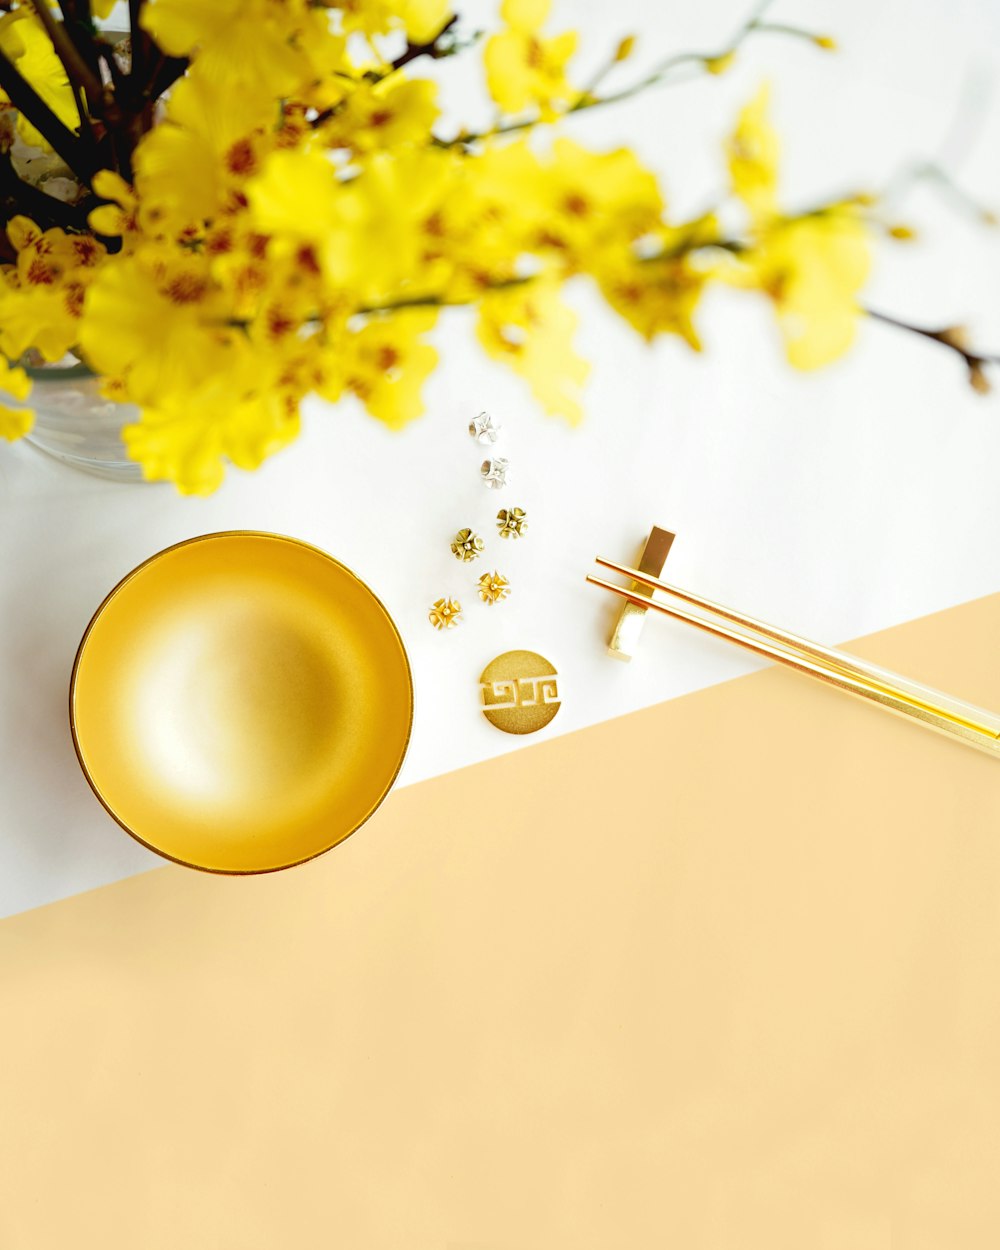 yellow round balloon with silver spoon